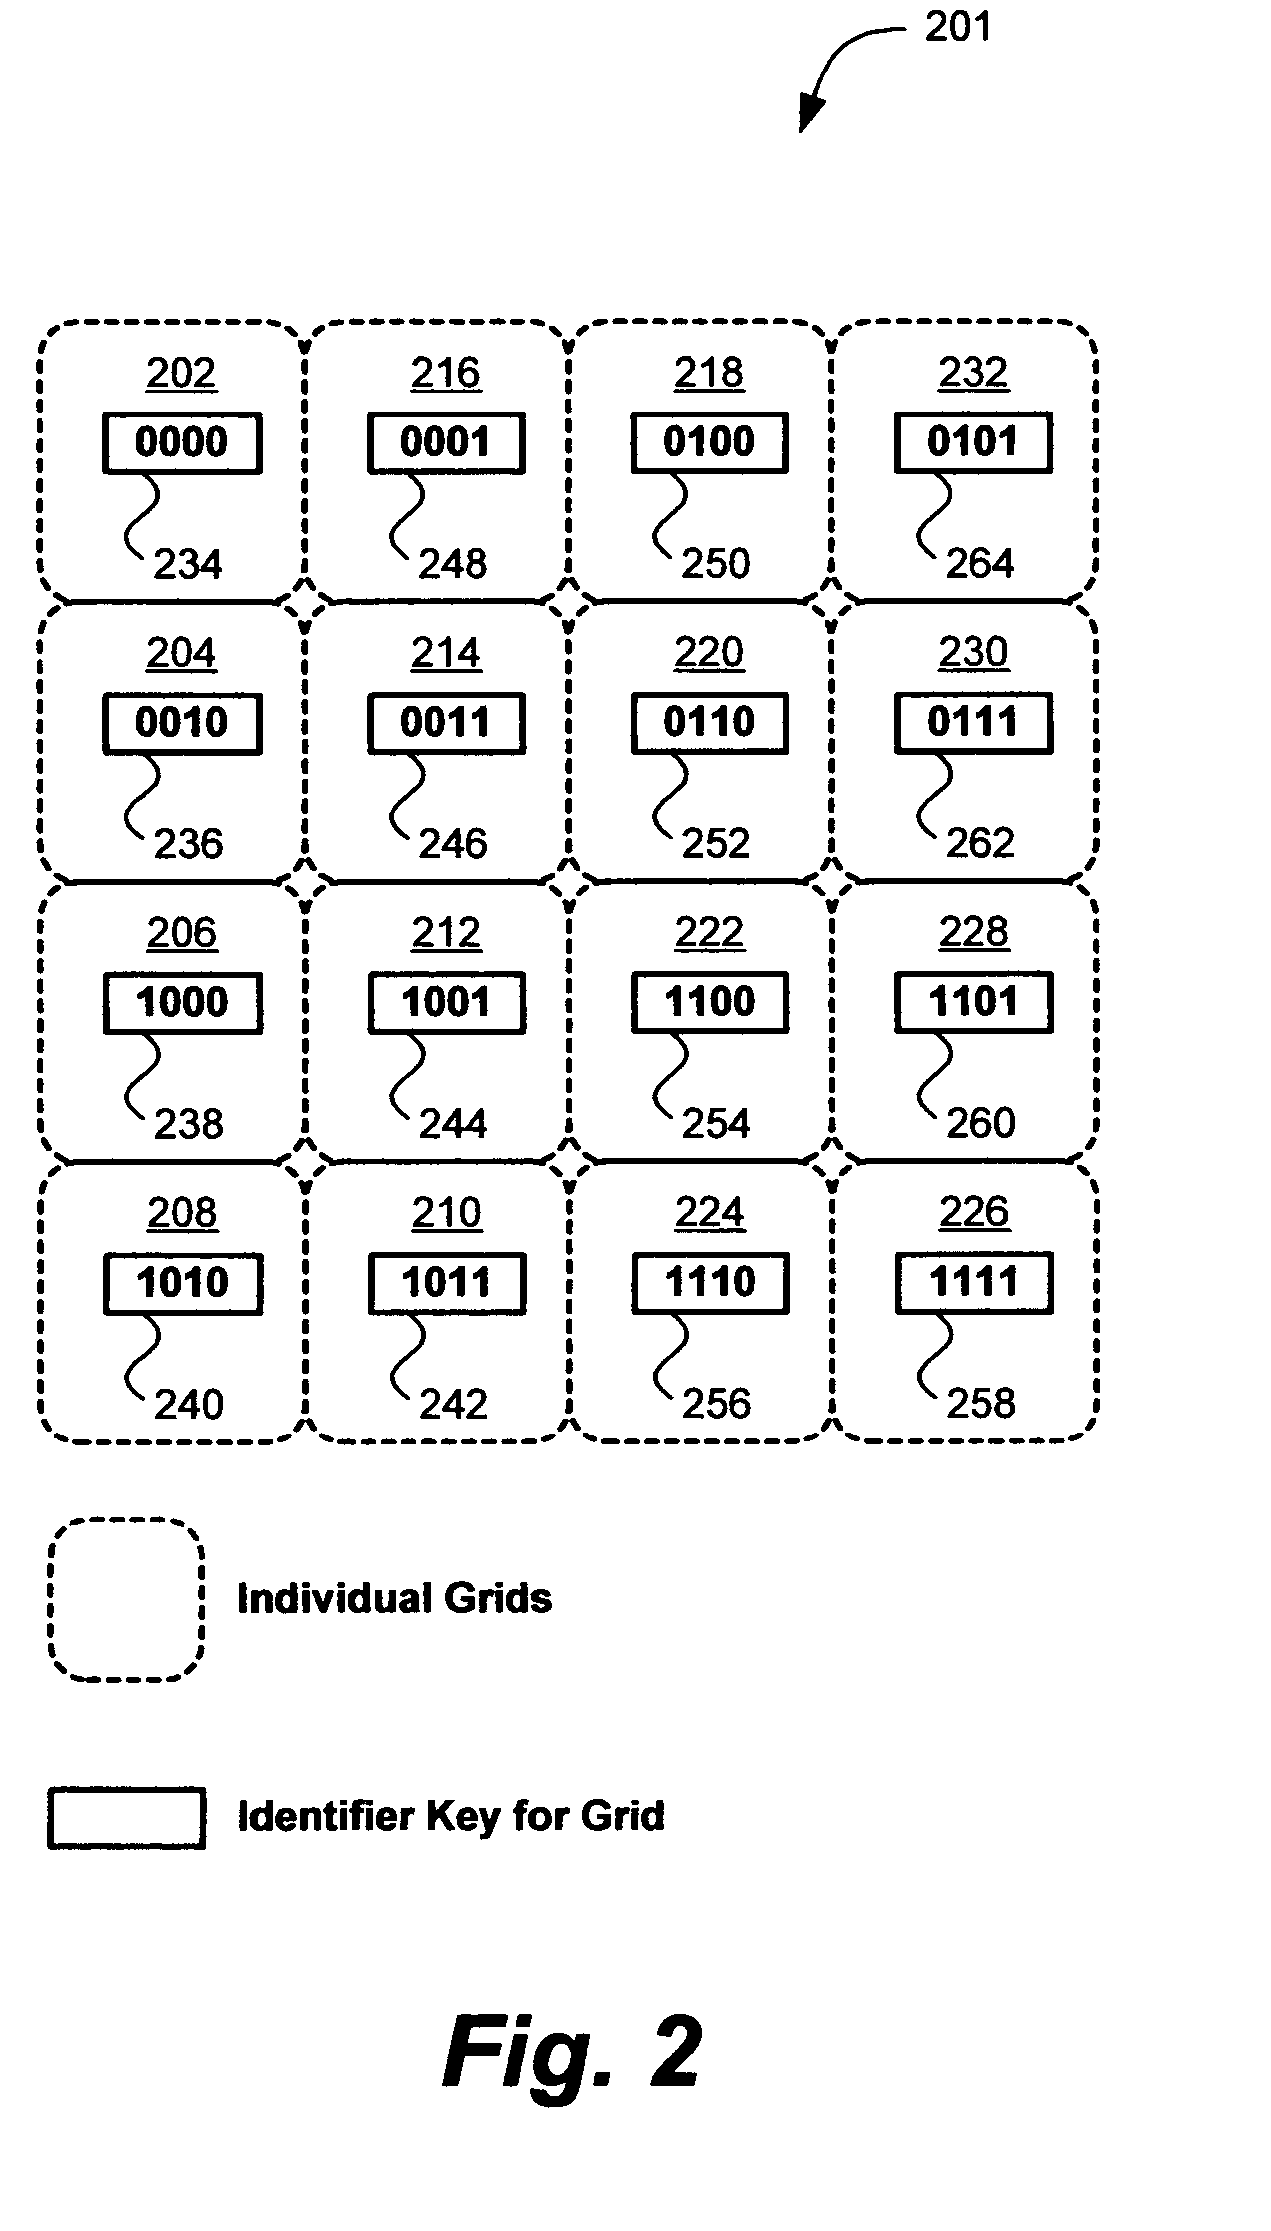 Adaptive load distribution in managing dynamic and transient data for distributed applications